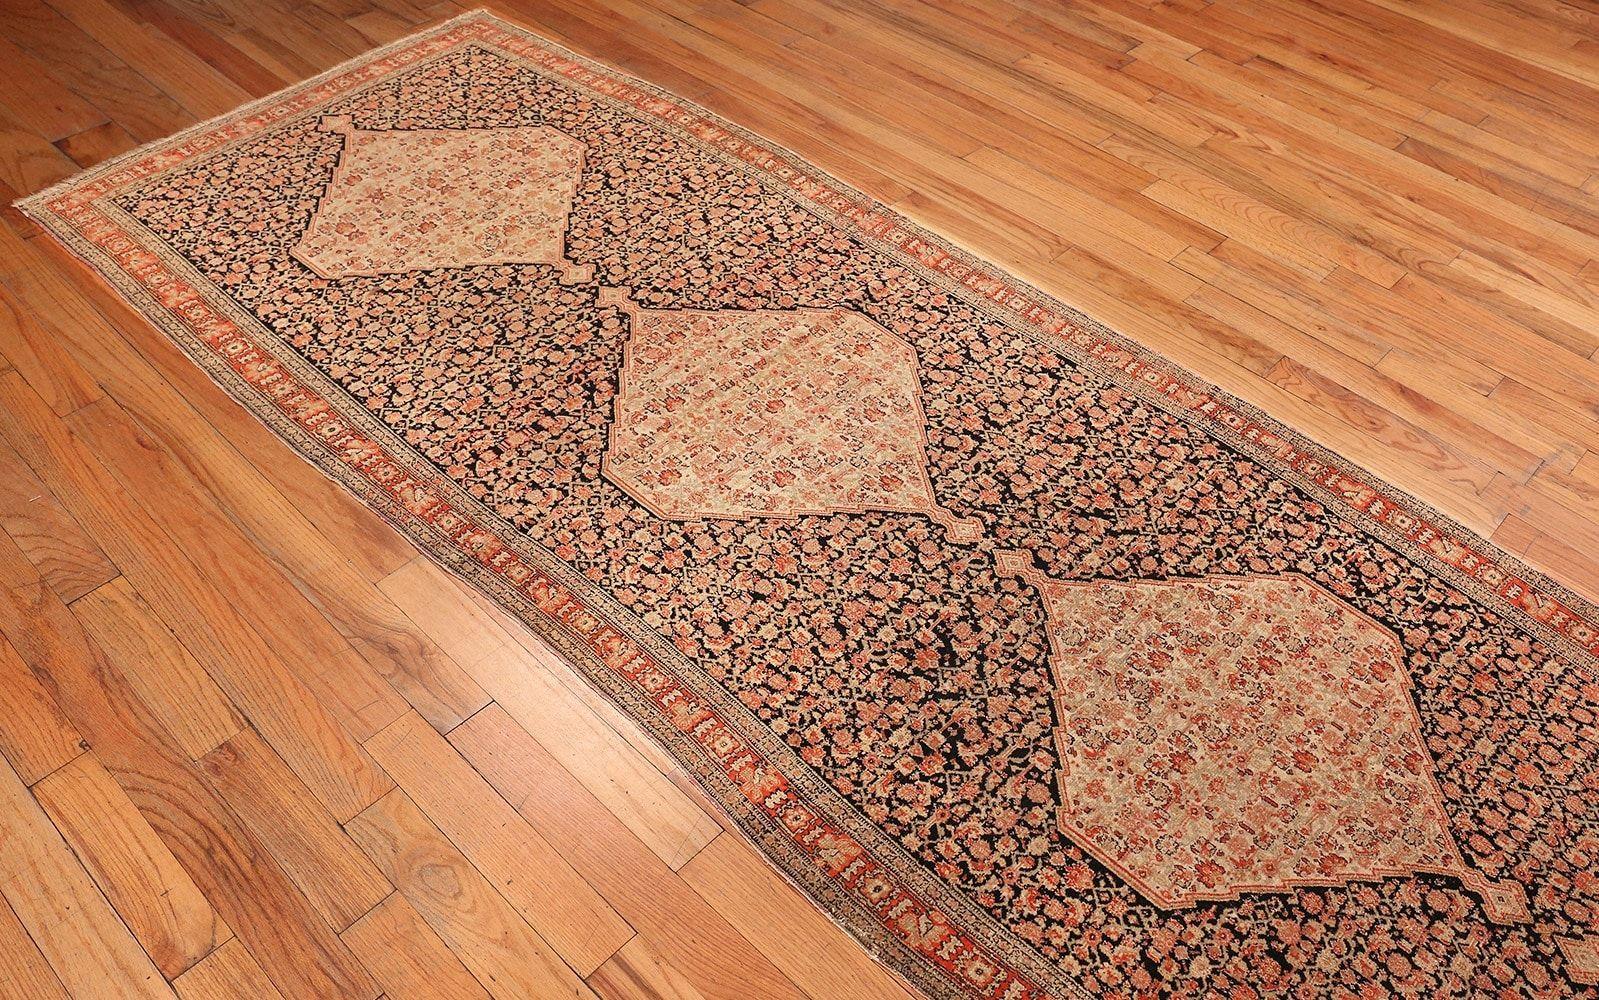 Antique Persian Senneh Runner Rug, Country Of Origin: Persia, Circa Date: Turn of the Twentieth Century – Size: 3 ft 10 in x 19 ft 2 in (1.17 m x 5.84 m)

A unique composition, this antique Persian Senneh rug exhibits tremendous detail throughout